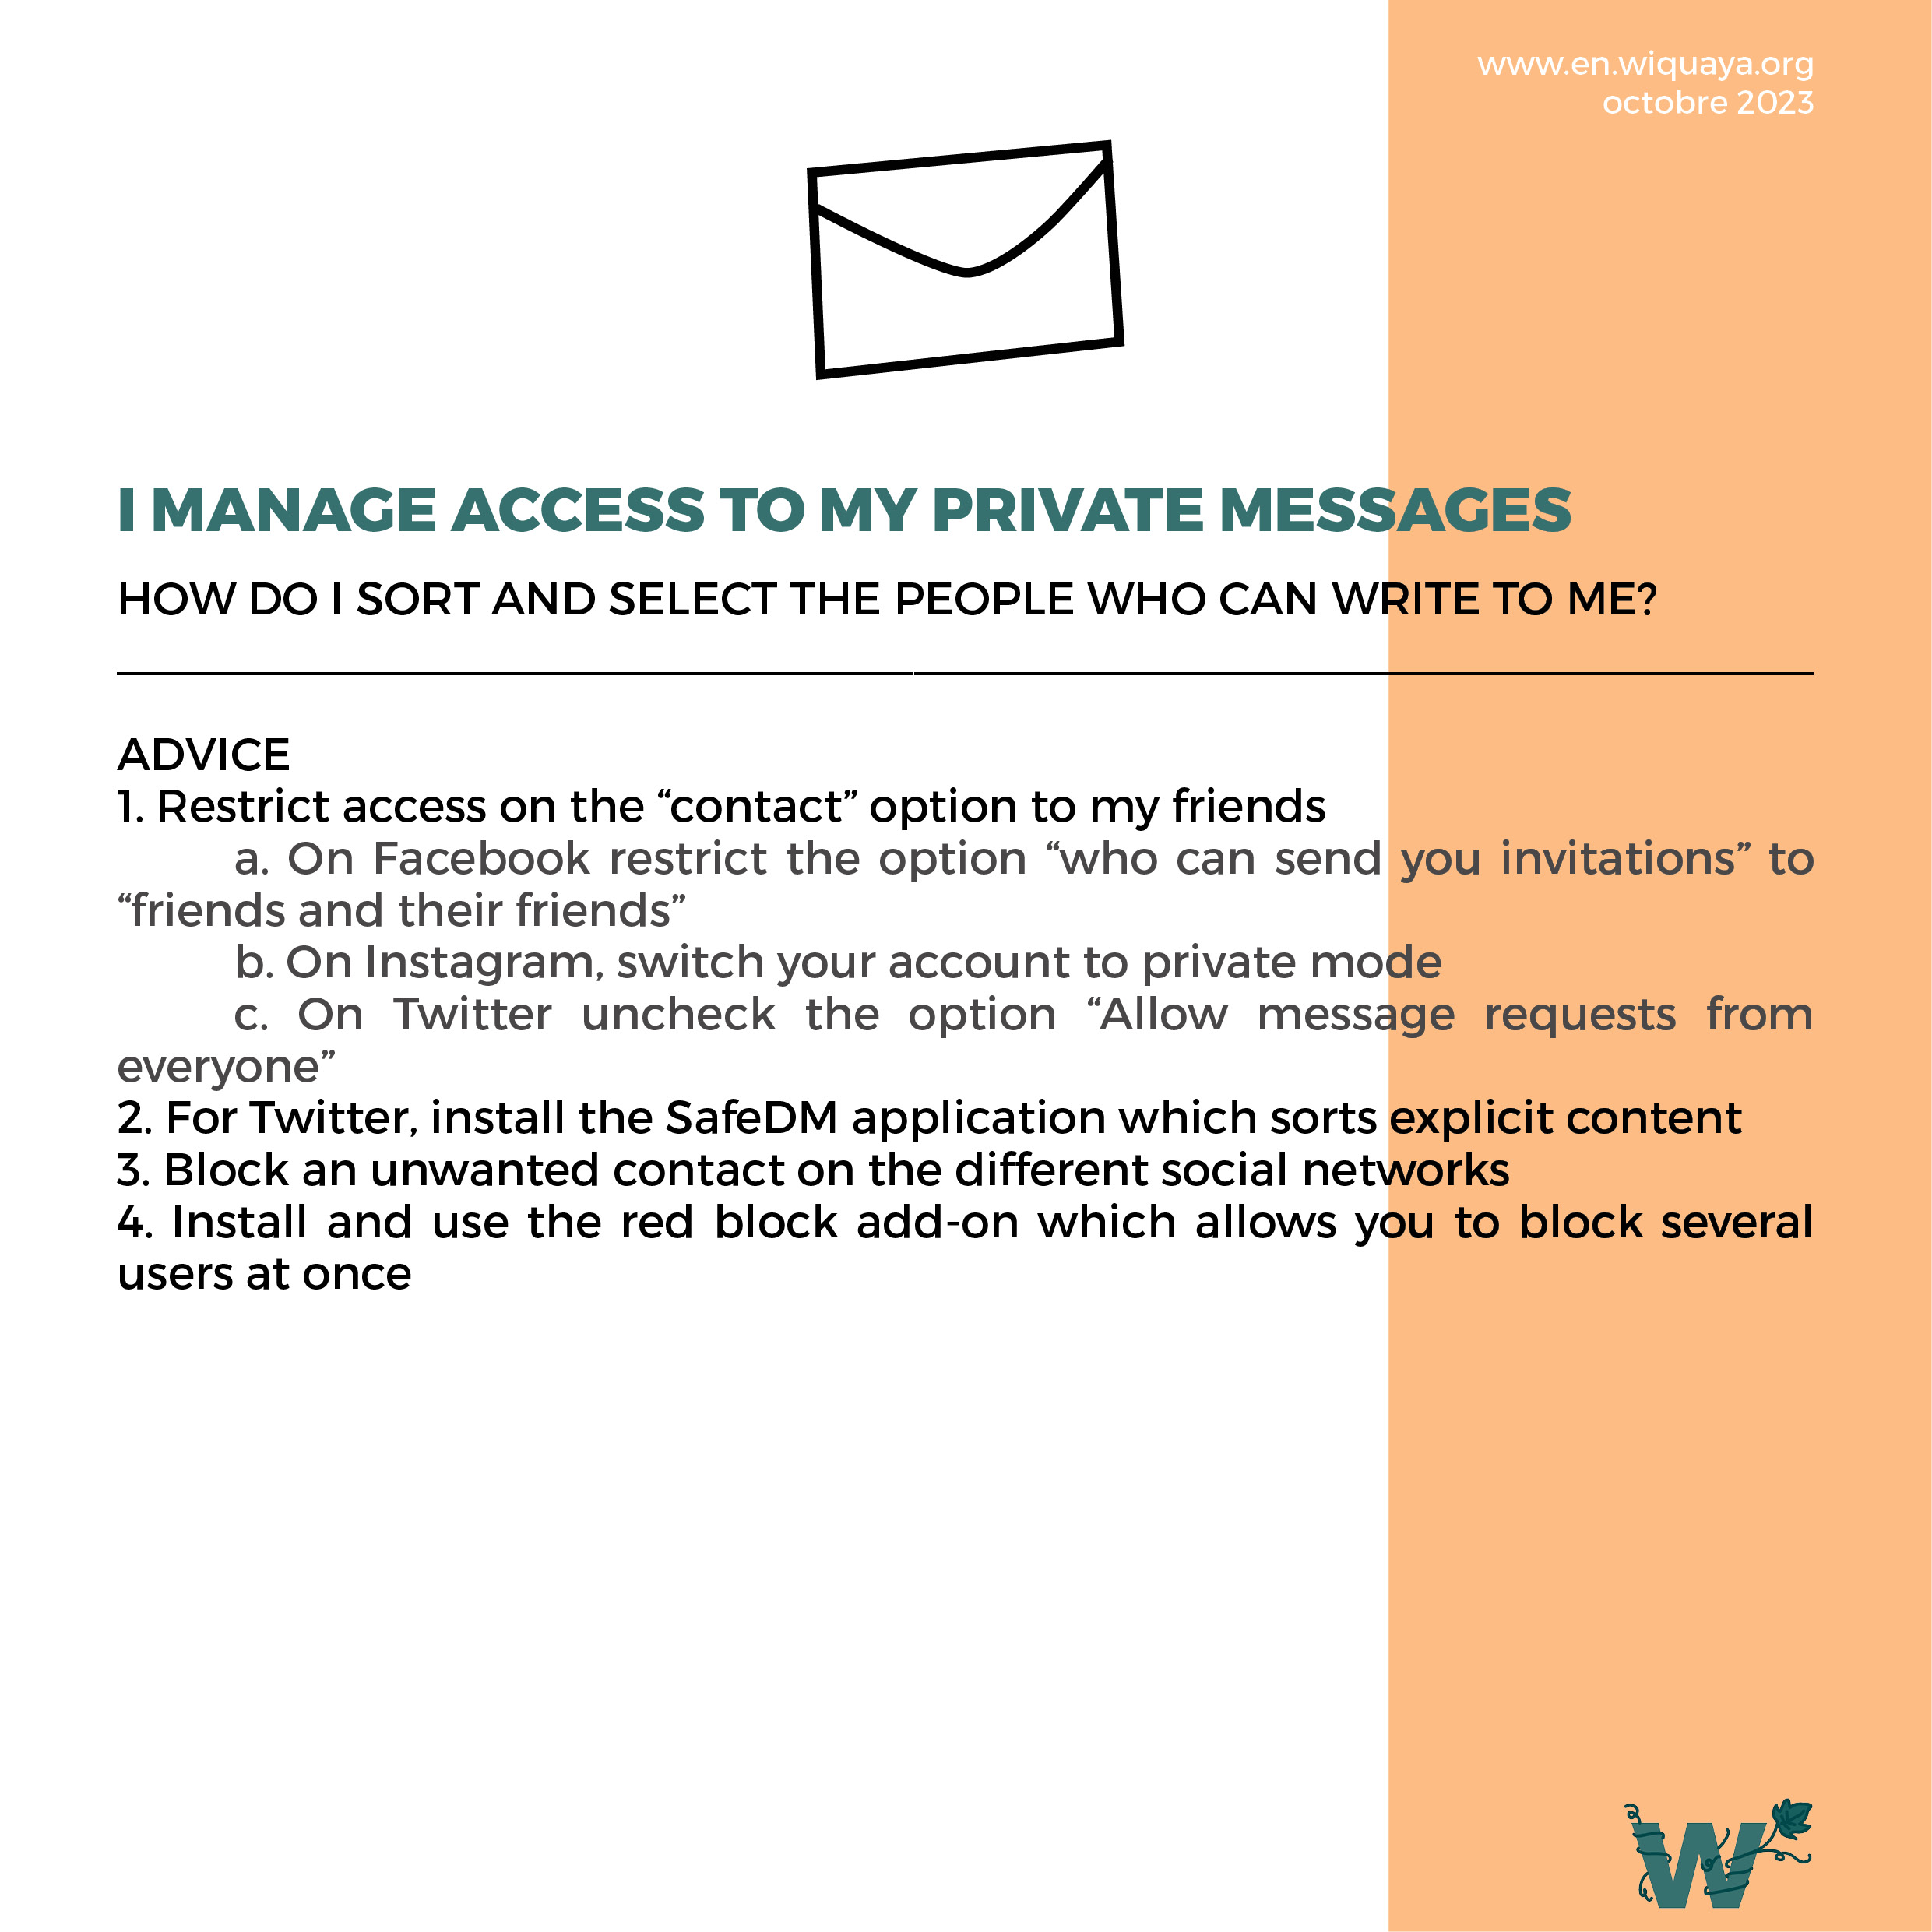 Help sheet I manage access to my private messages